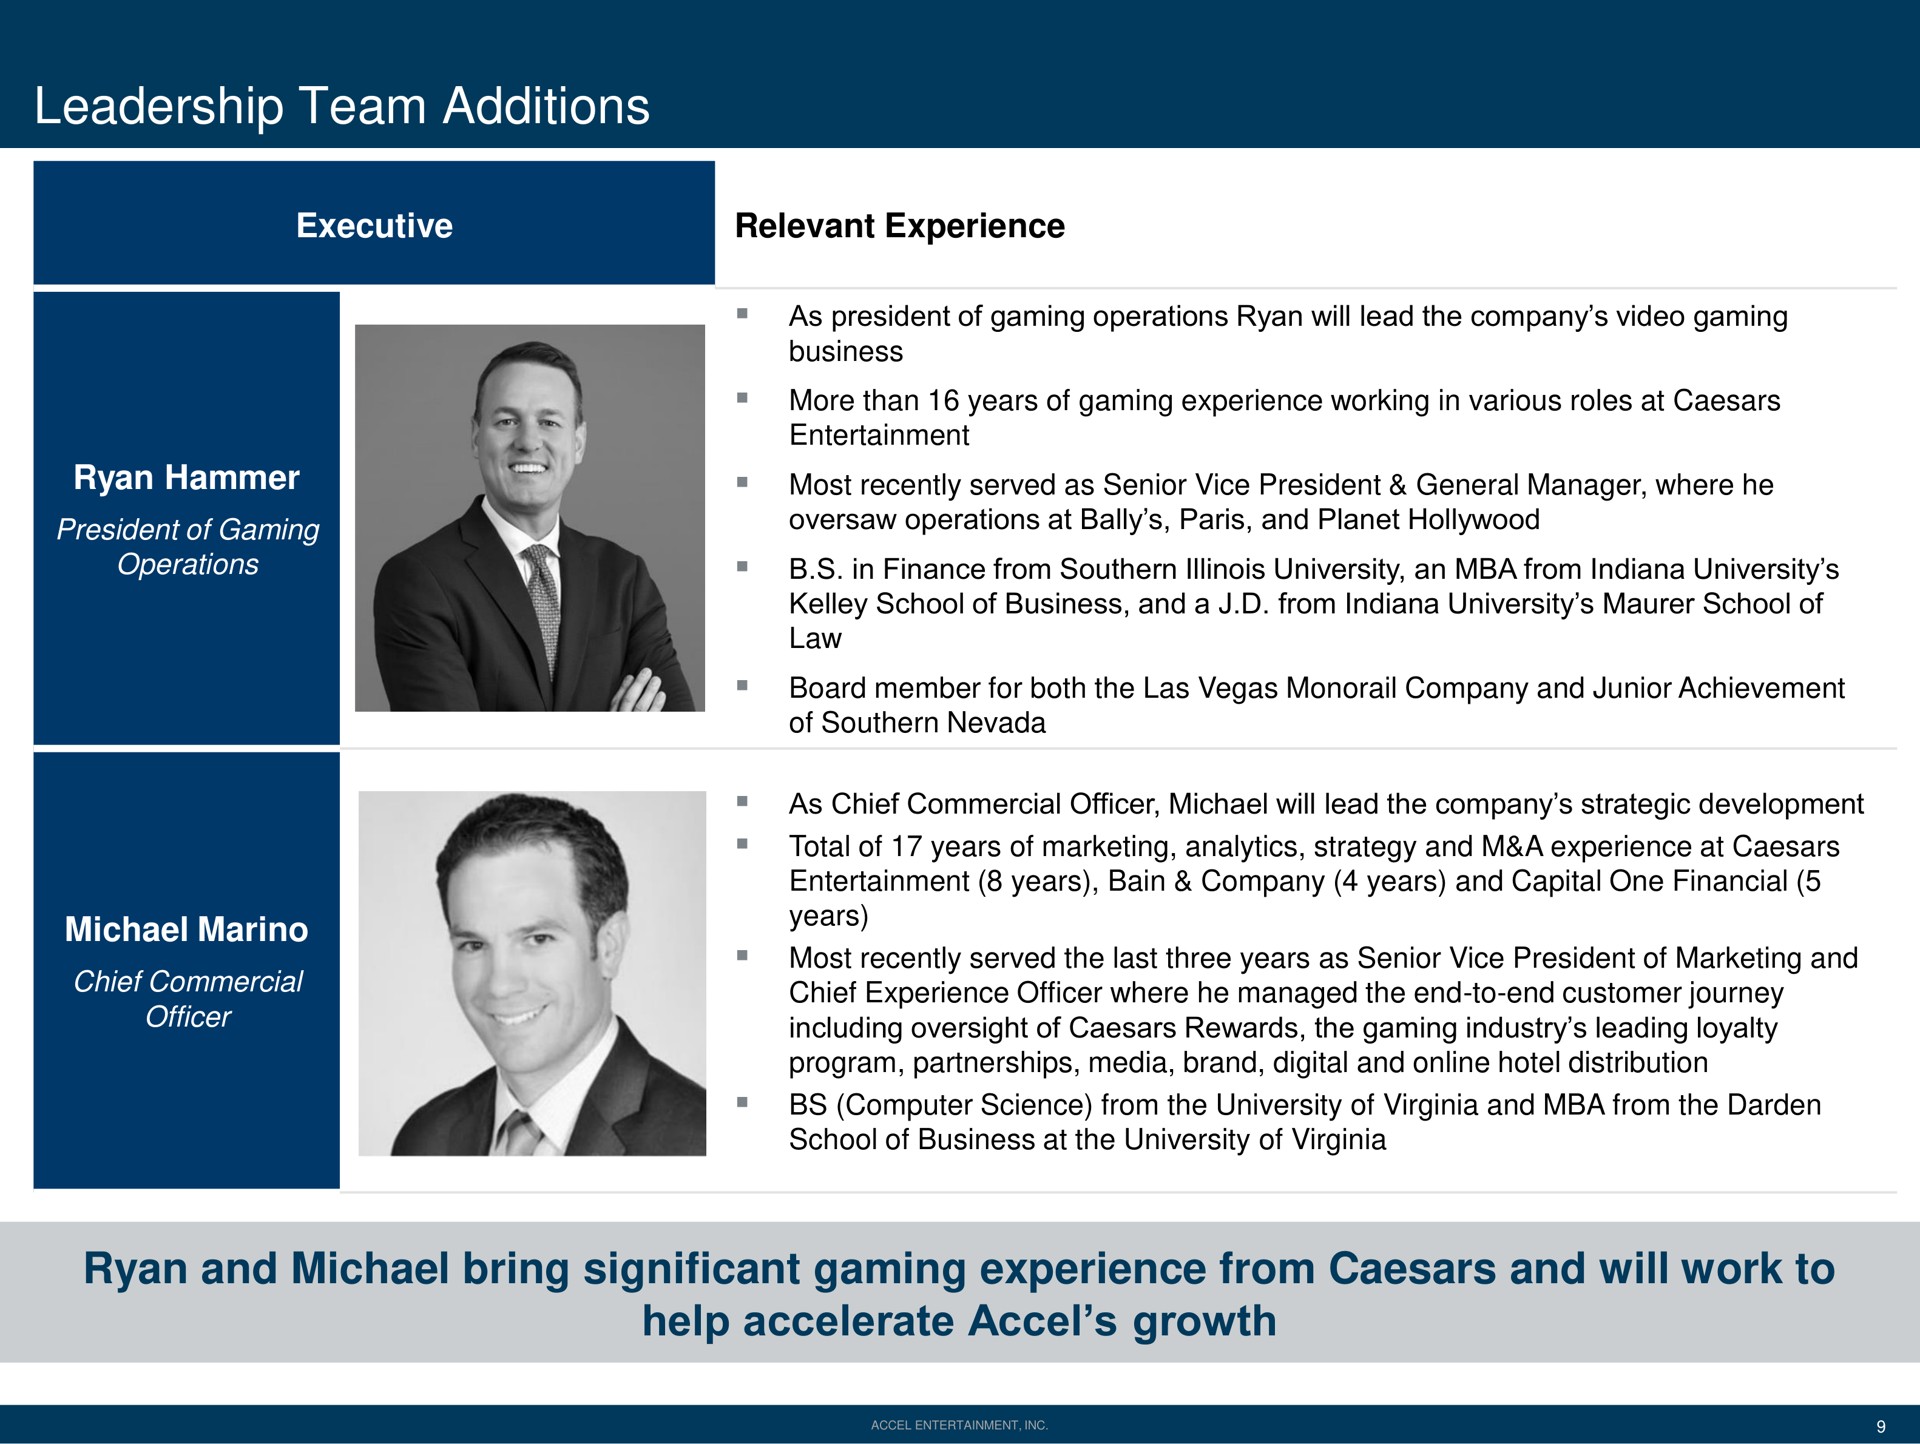 leadership team additions and bring significant gaming experience from and will work to help accelerate growth years | Accel Entertaiment